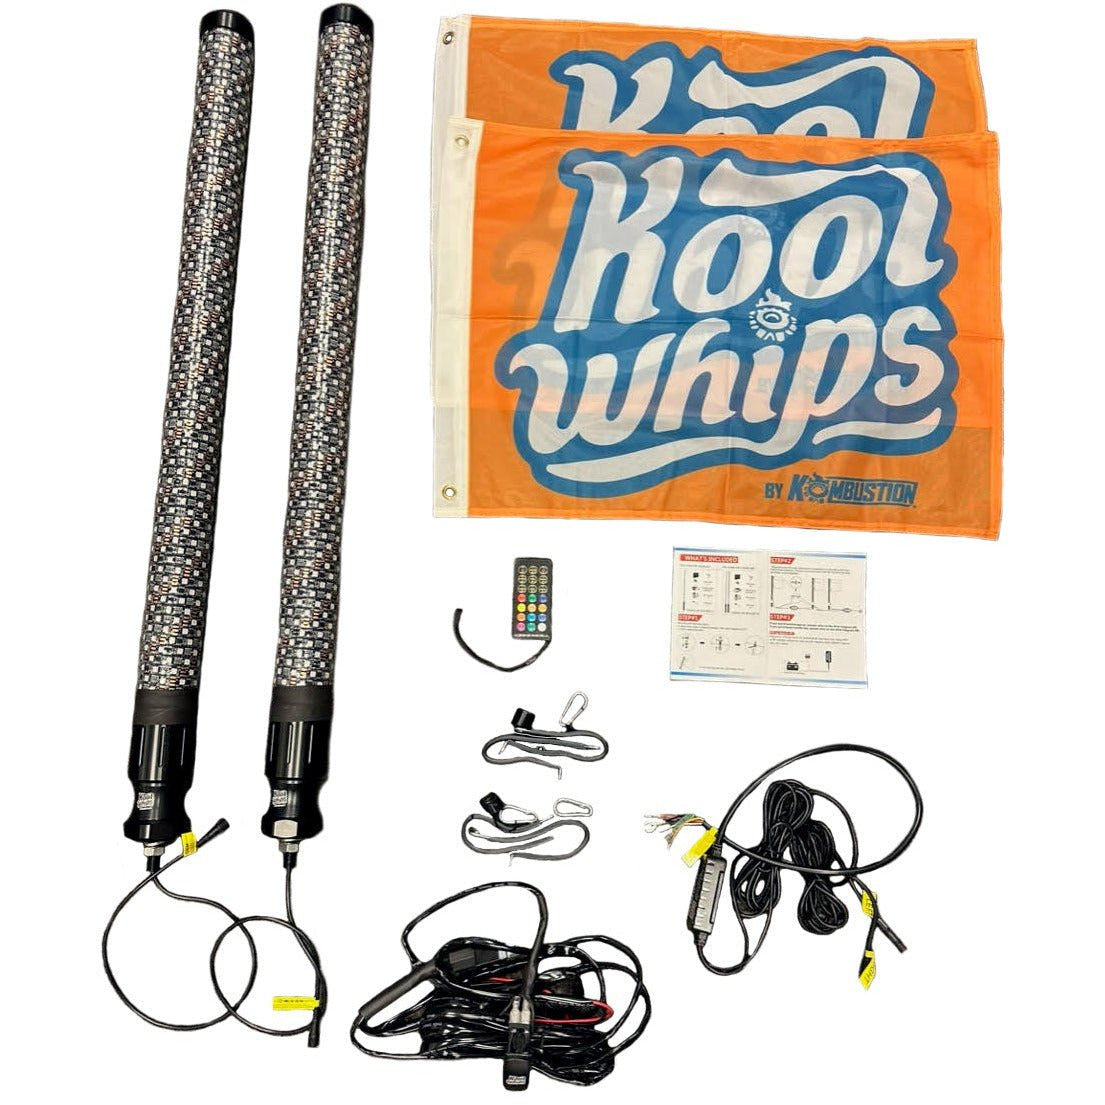 "The Big Schwartz" Kool Whips 3ft 2" thick (Pair)